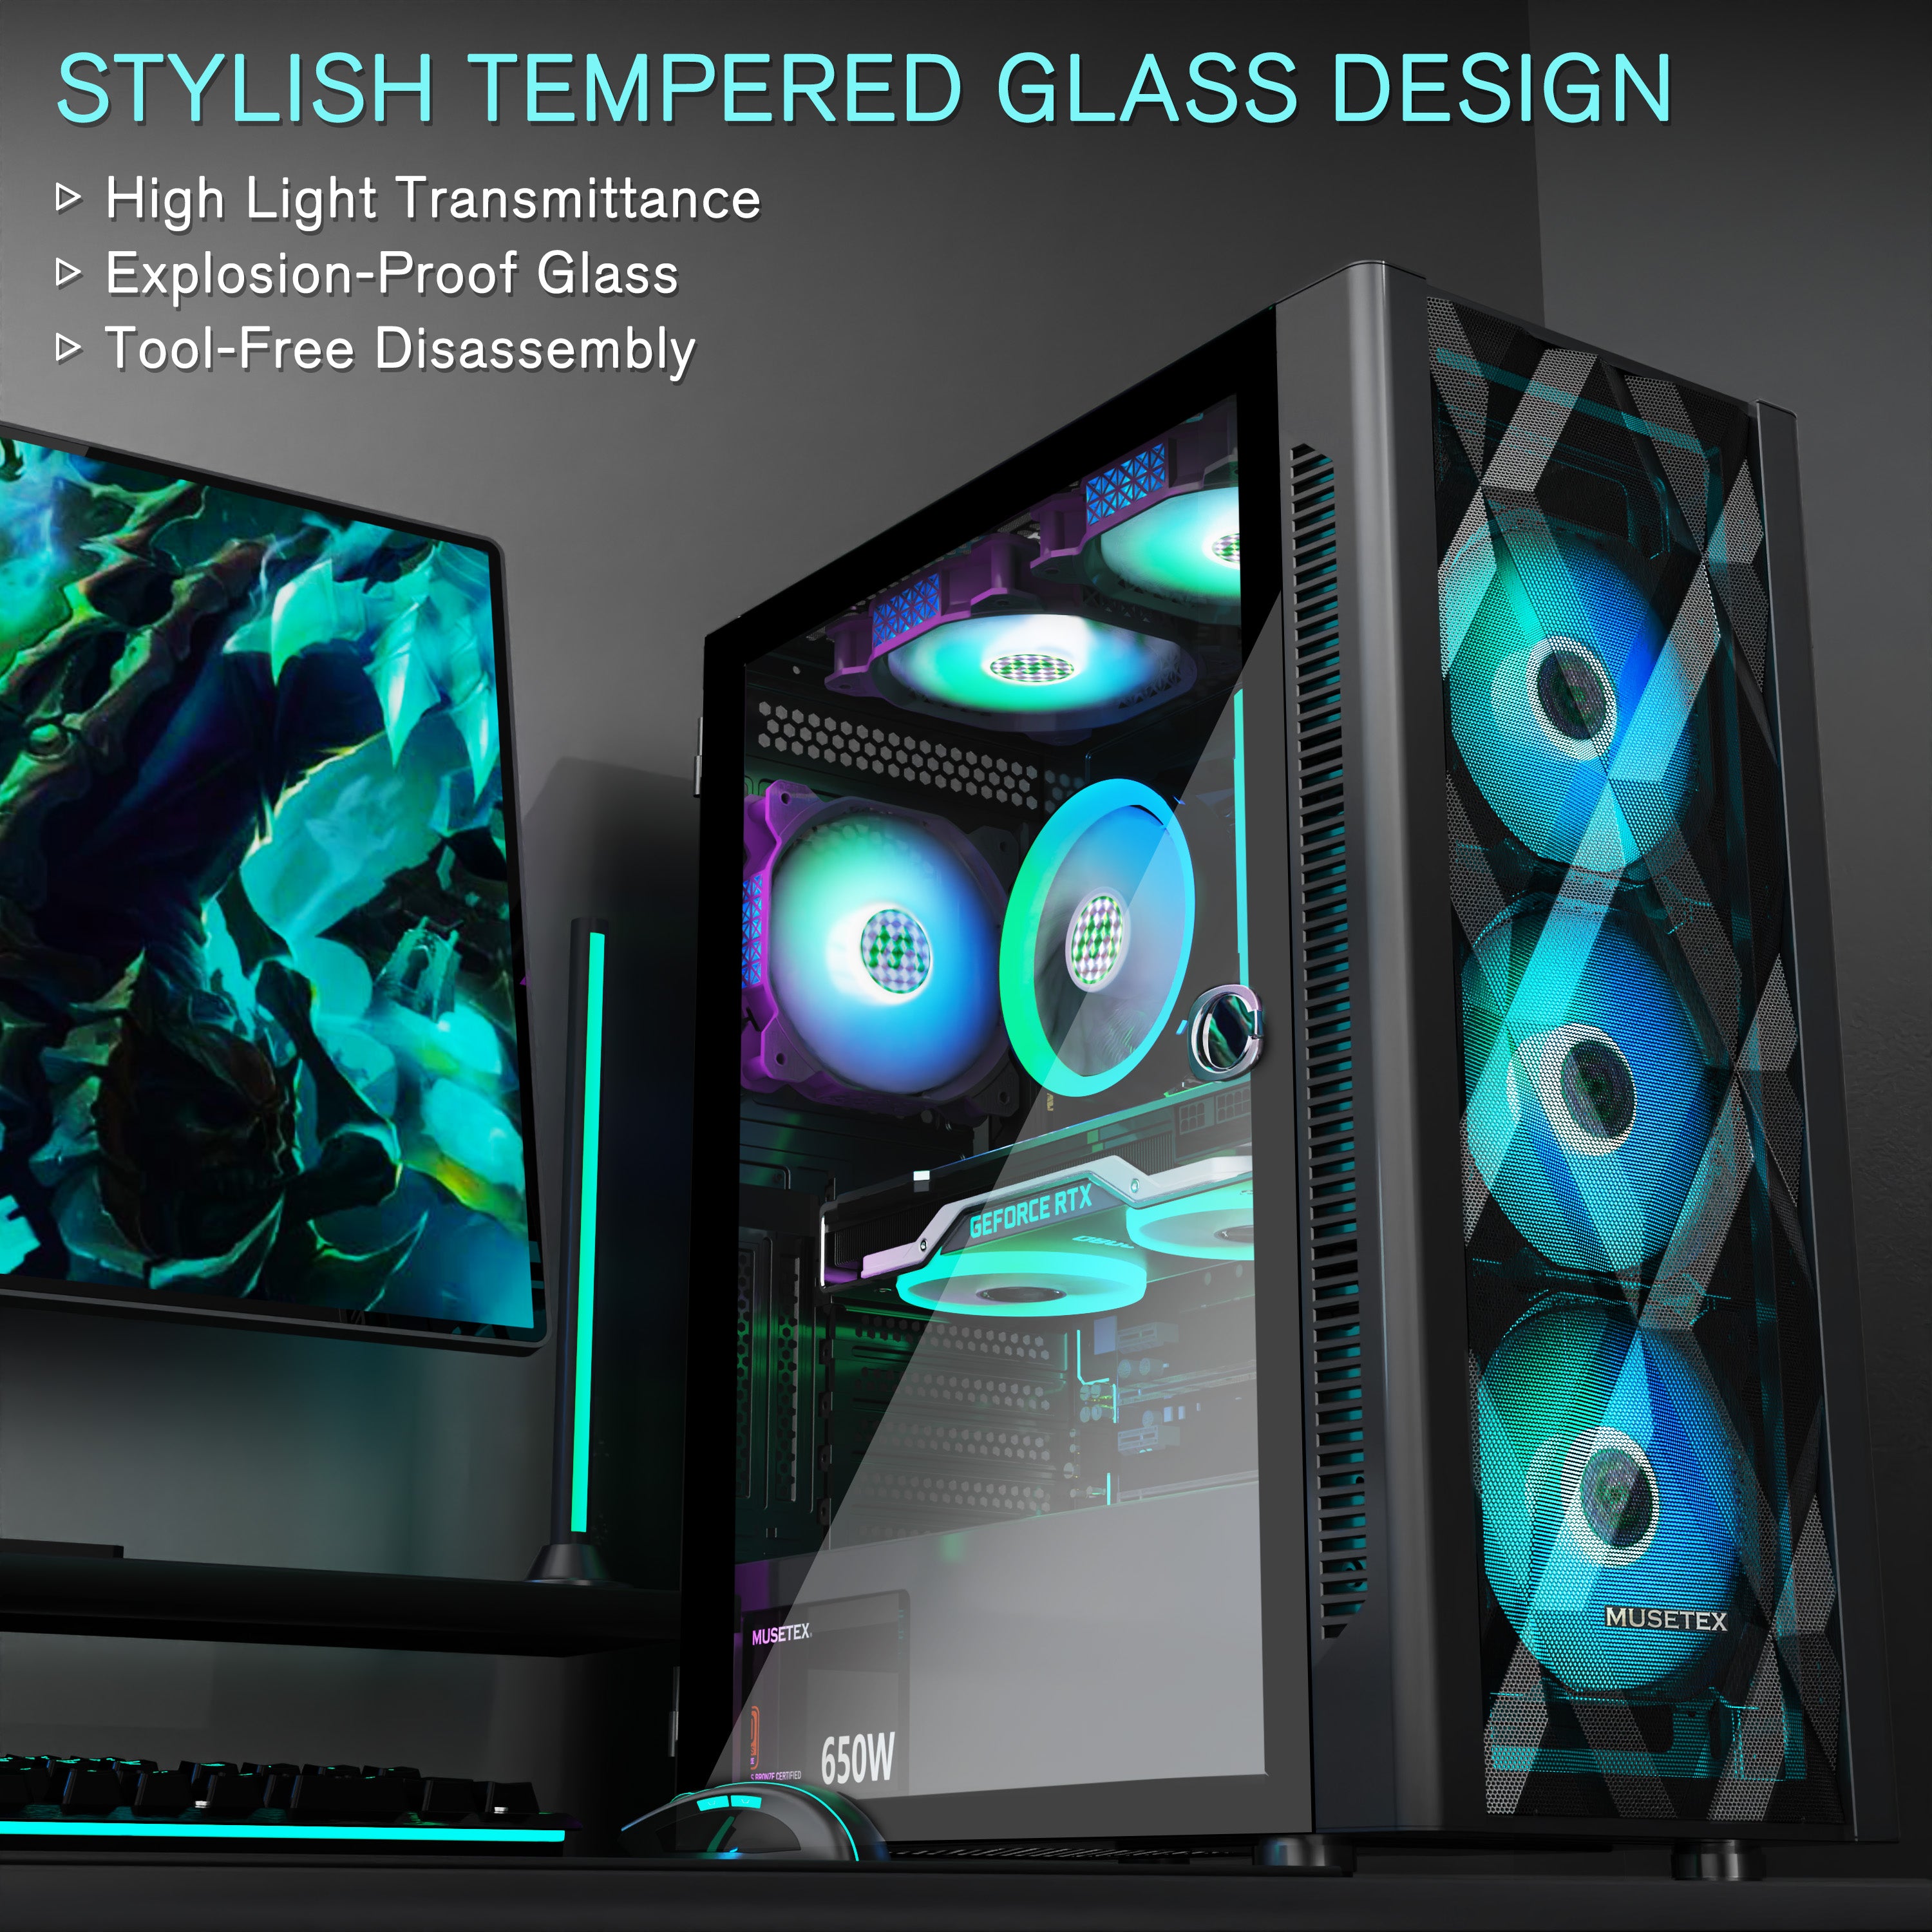 MUSETEX ATX PC Case Pre-Install 6 PWM ARGB Fans, Polygonal Mesh Computer Gaming Case, Opening Tempered Glass Side Panel Mid-Tower Case, USB 3.0 x 2, Black, NN8-PWM